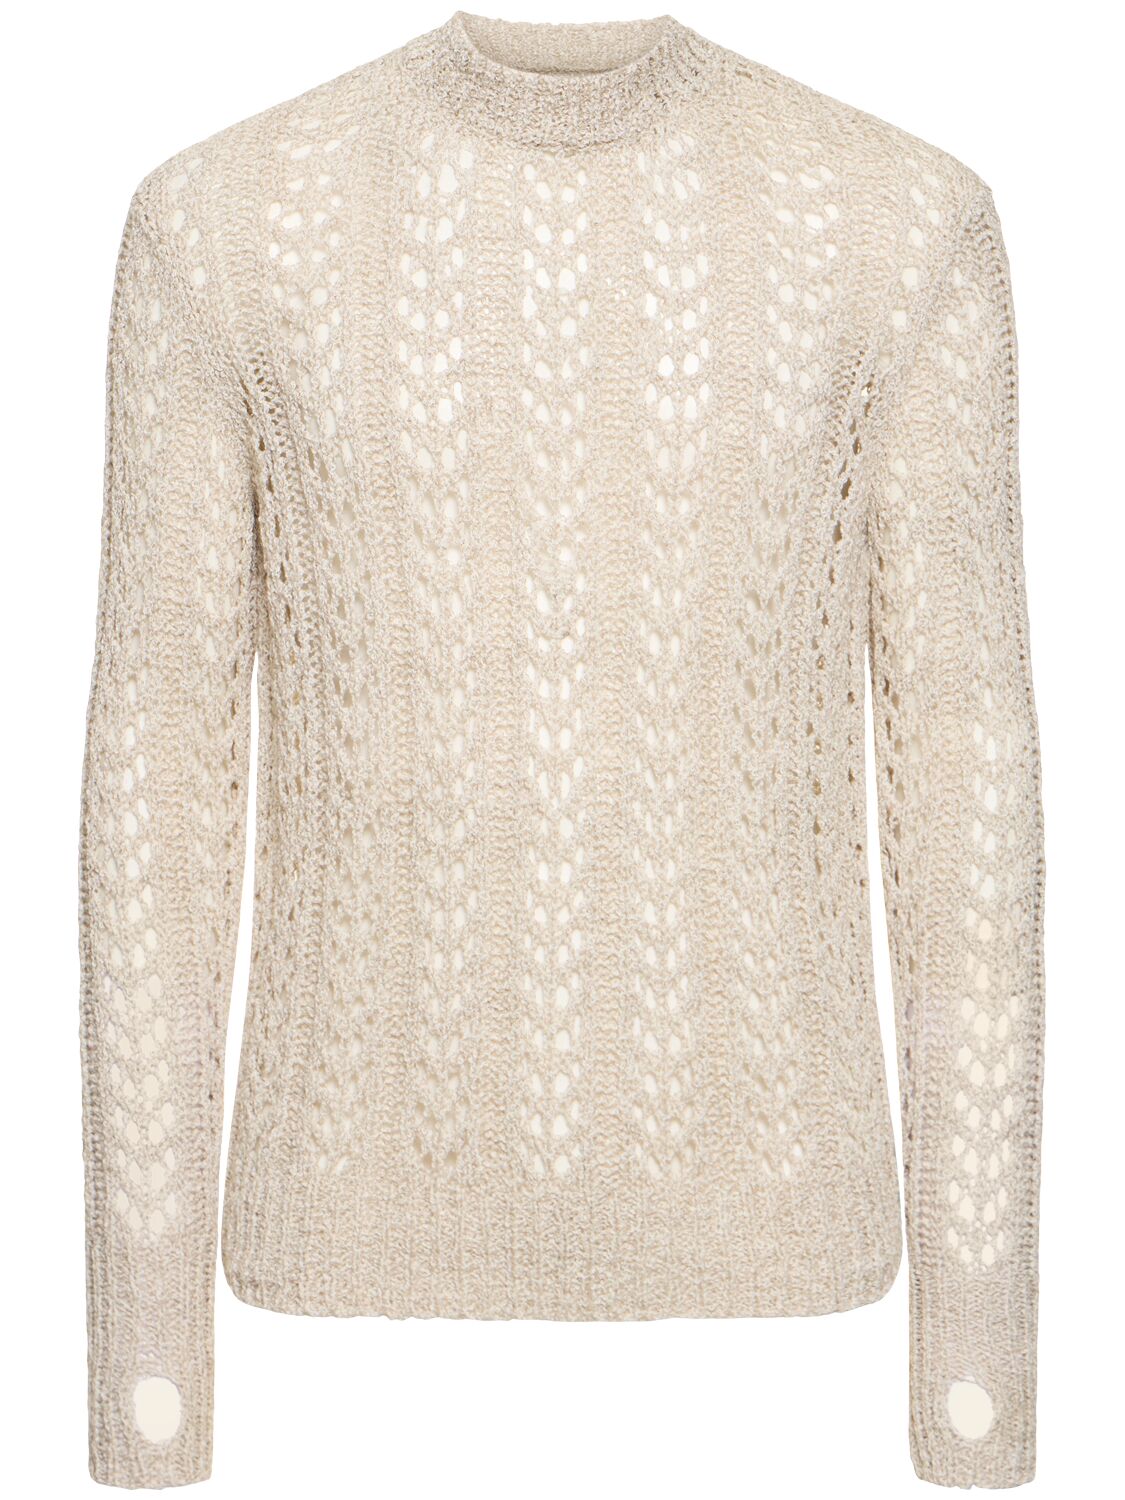 J.l-a.l Redos Cotton Blend Open Knit Sweater In Cream